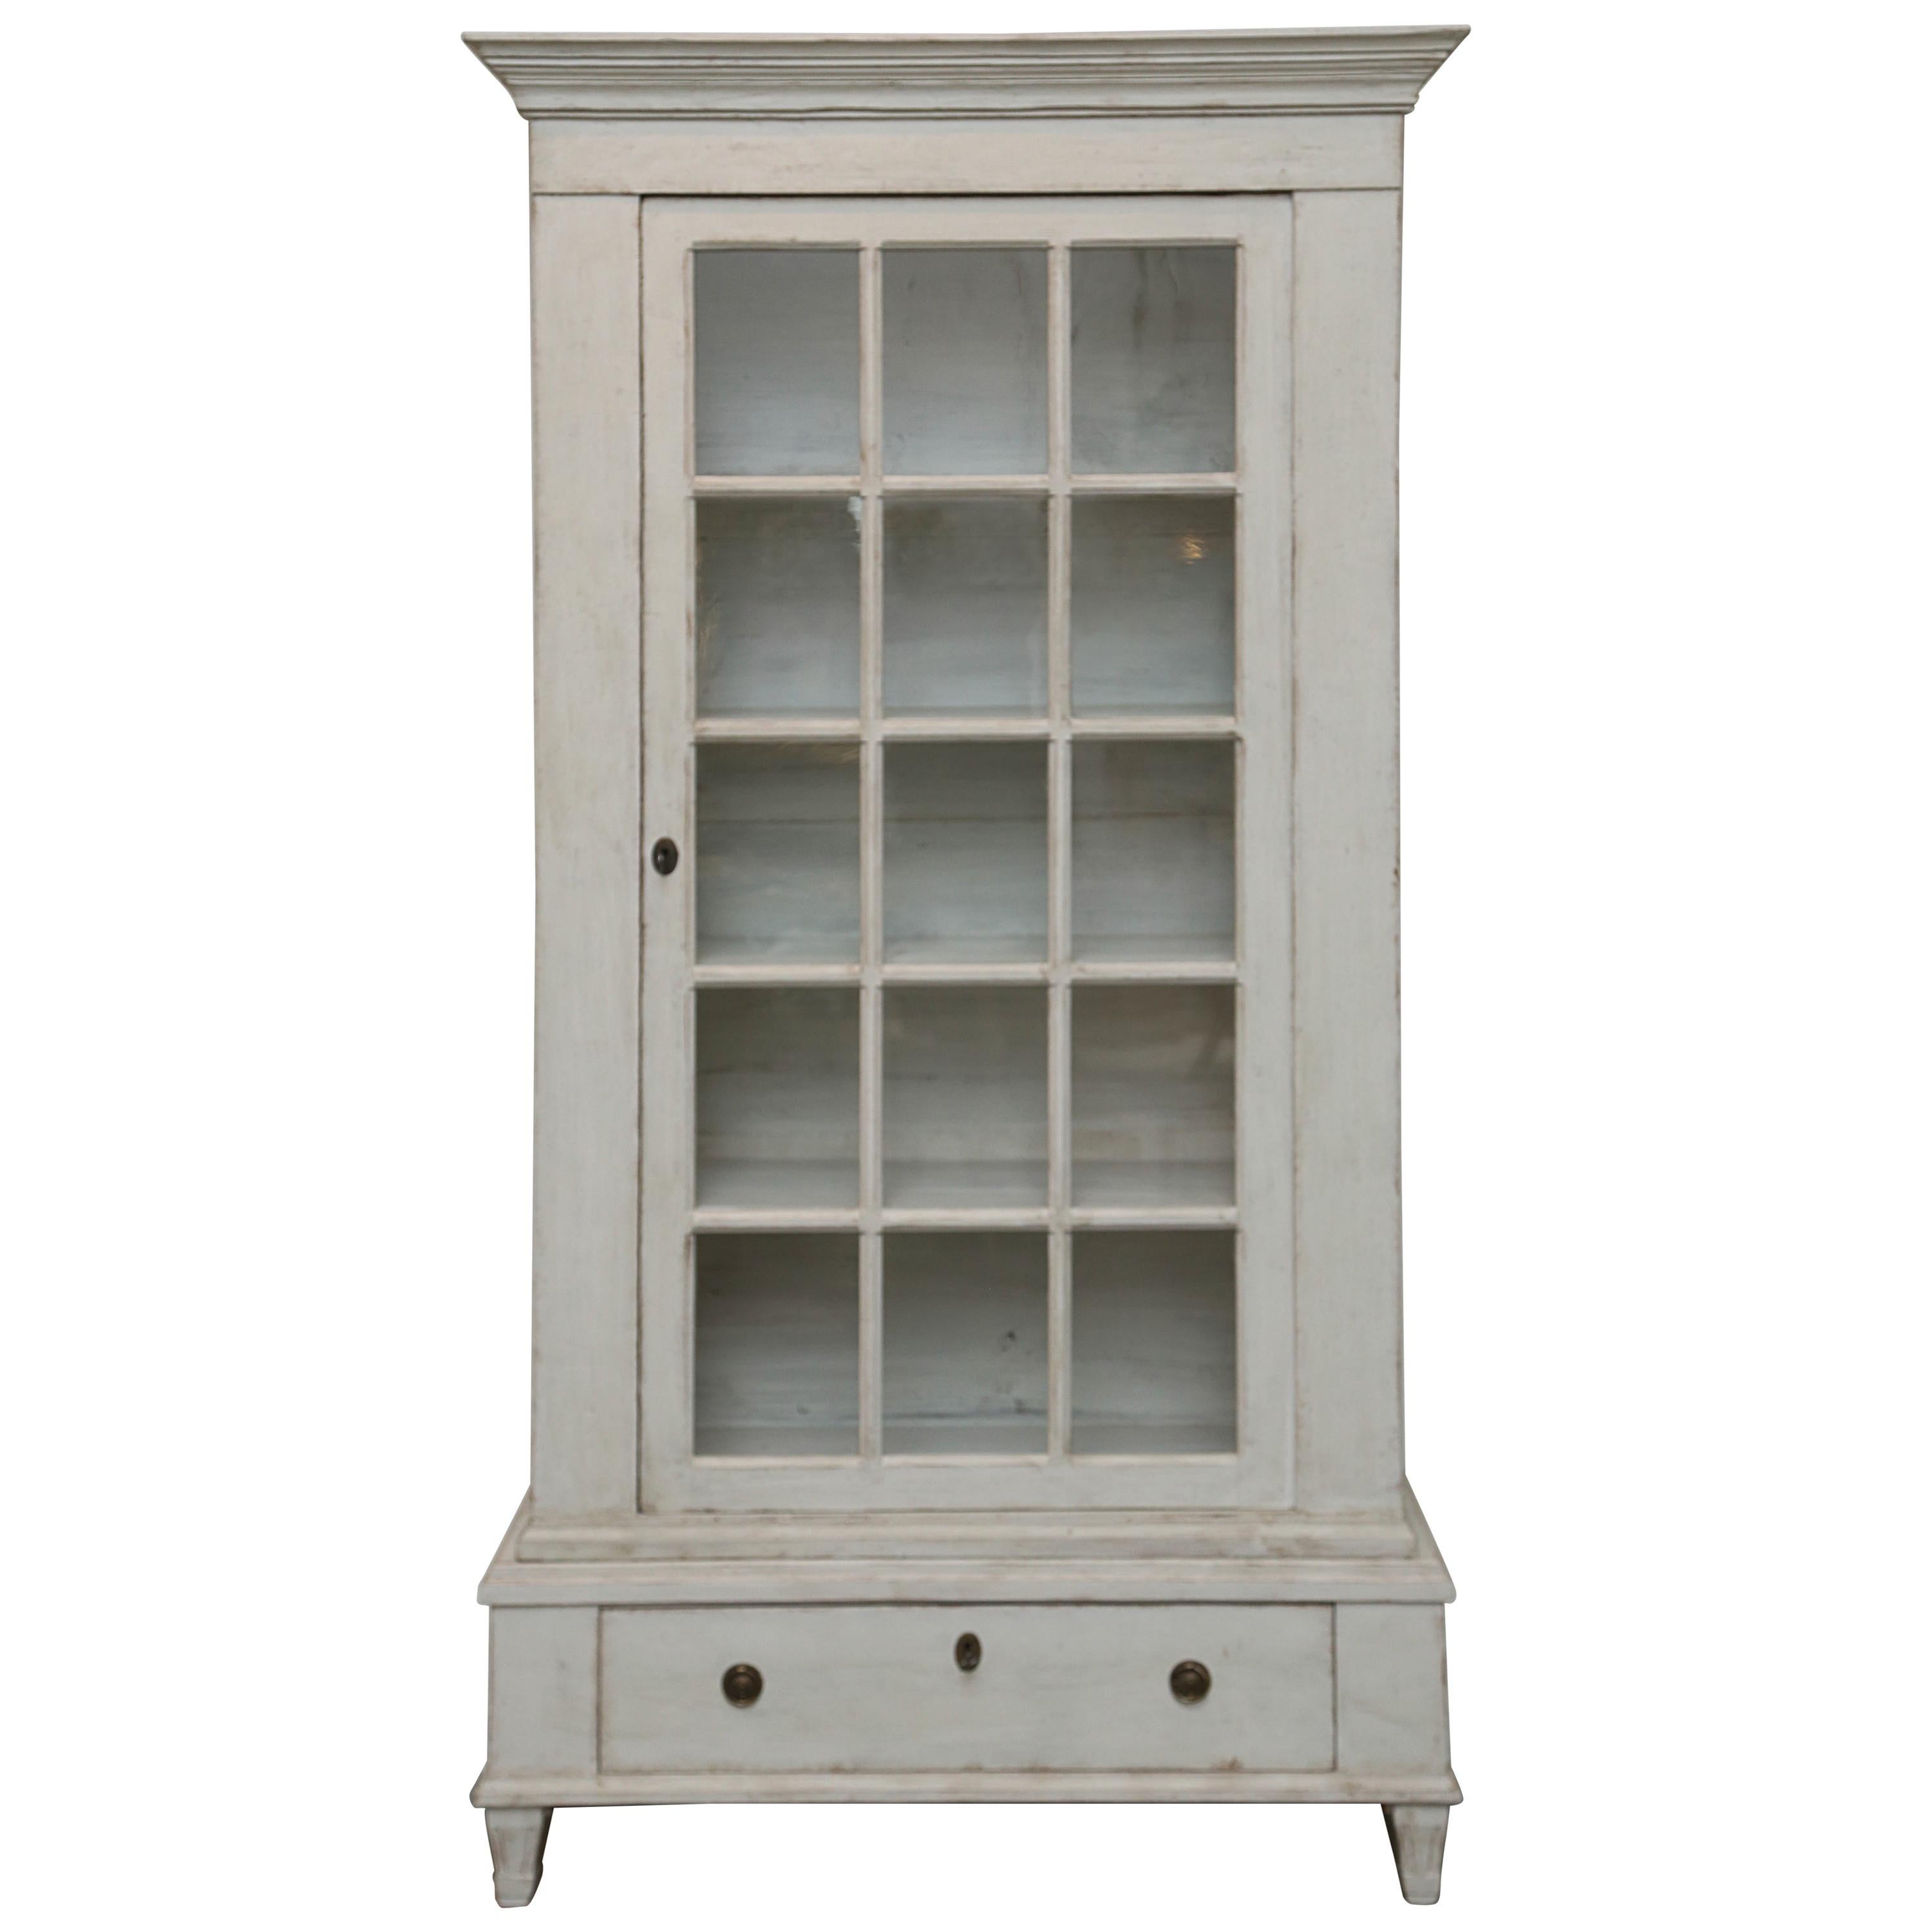 Antique Swedish Gustavian Style Painted Glass Door Cabinet, Mid-19th Century